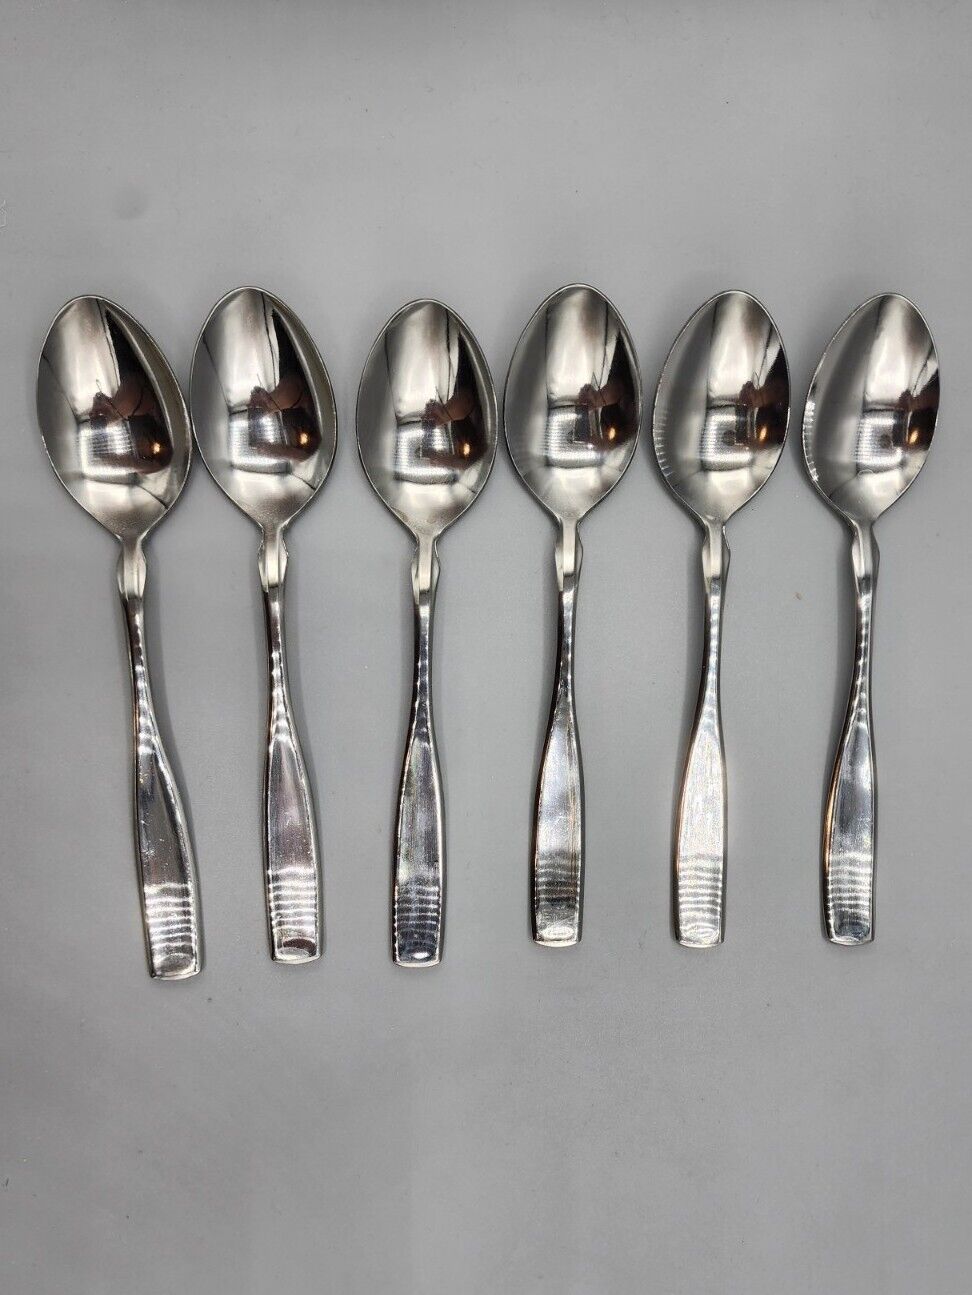 6 Delta Airlines Spoon Lot Stainless Steel Flatware Signed ABCO New Vintage